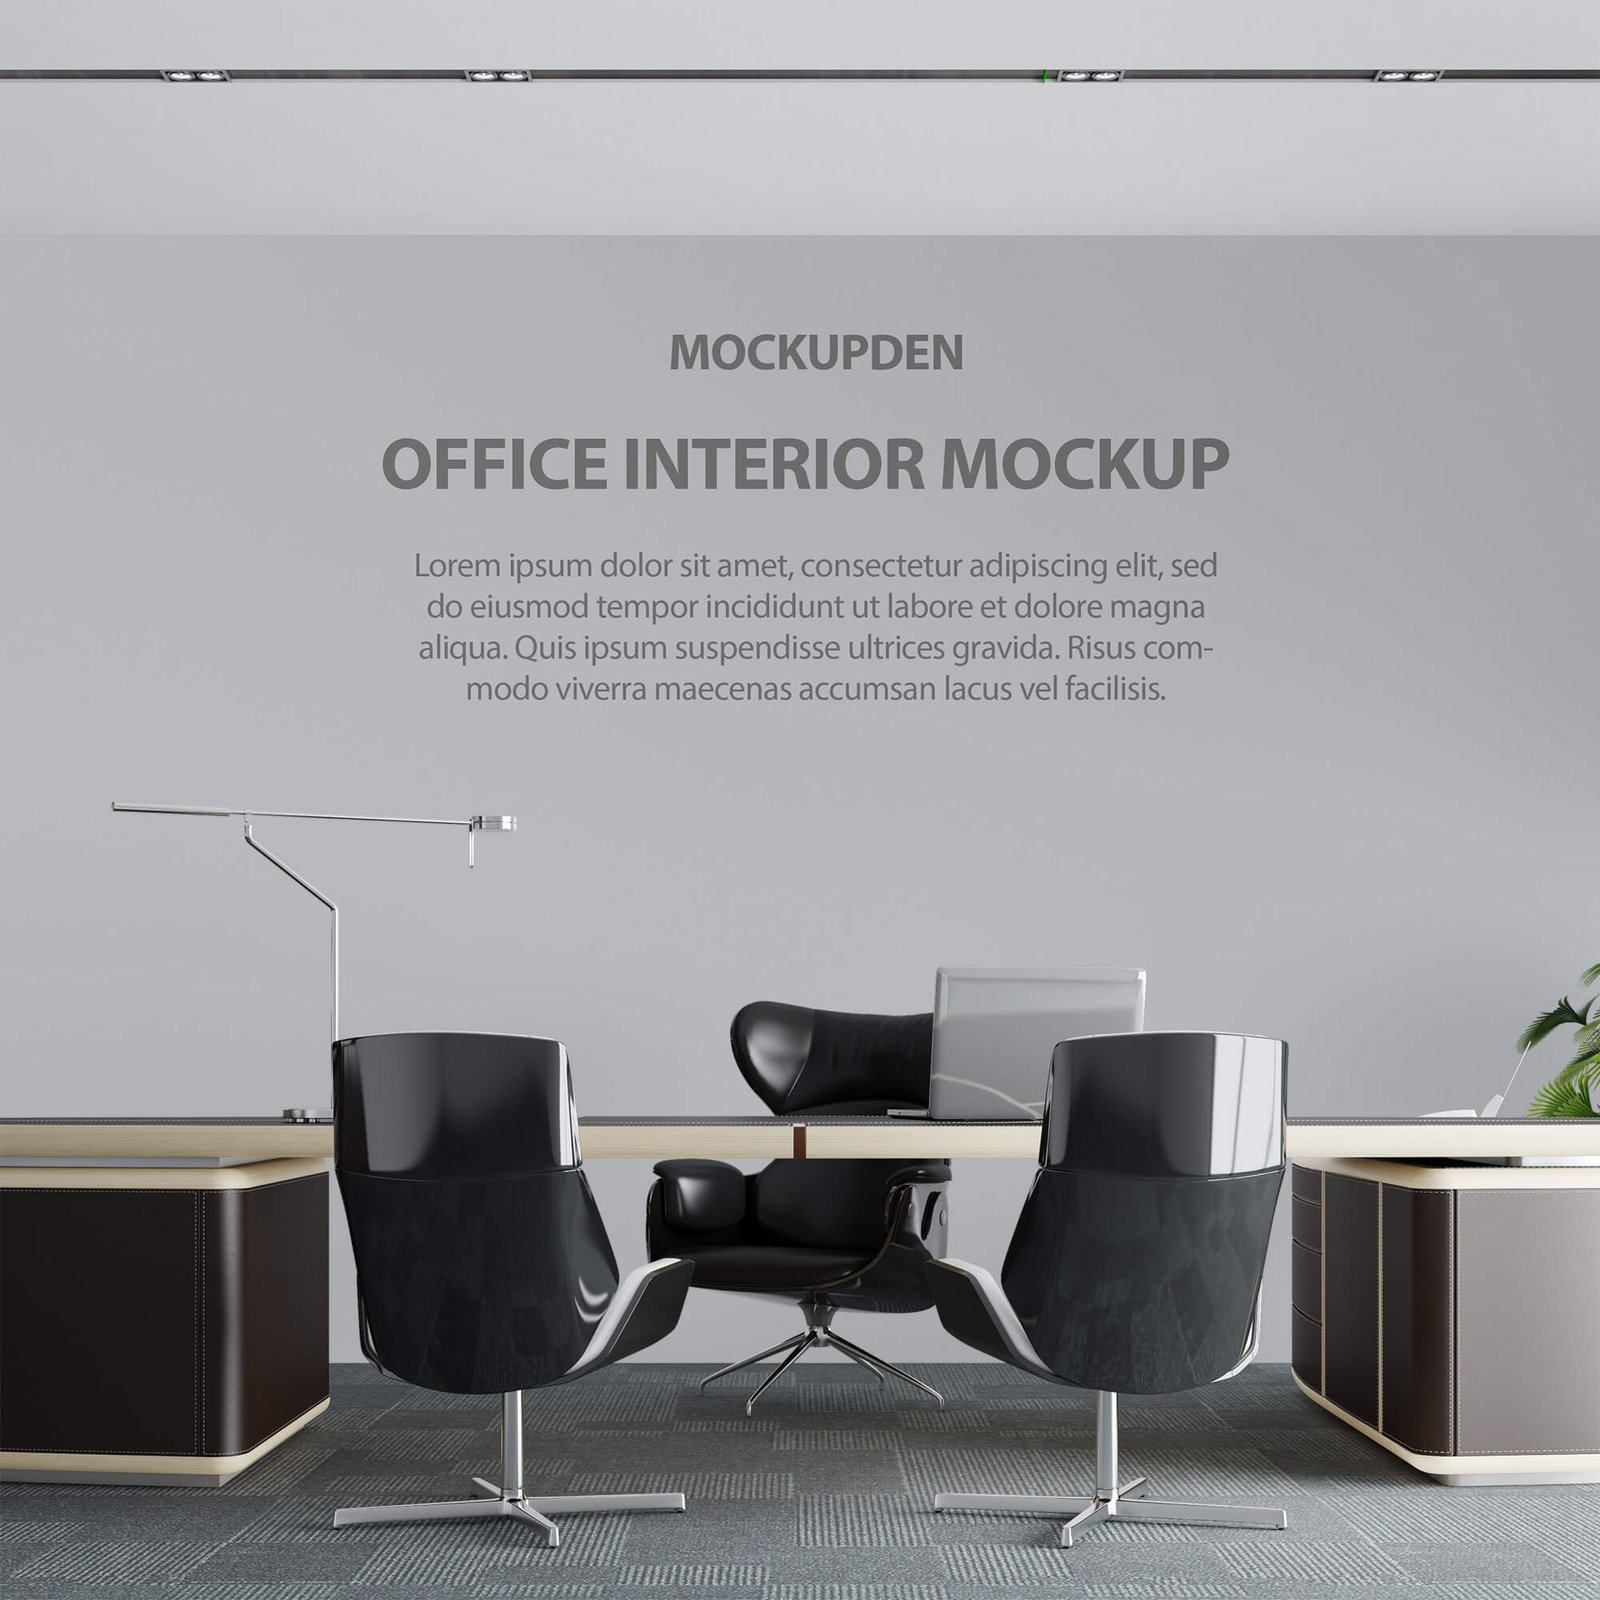 Free Office interior Mockup PSD Template